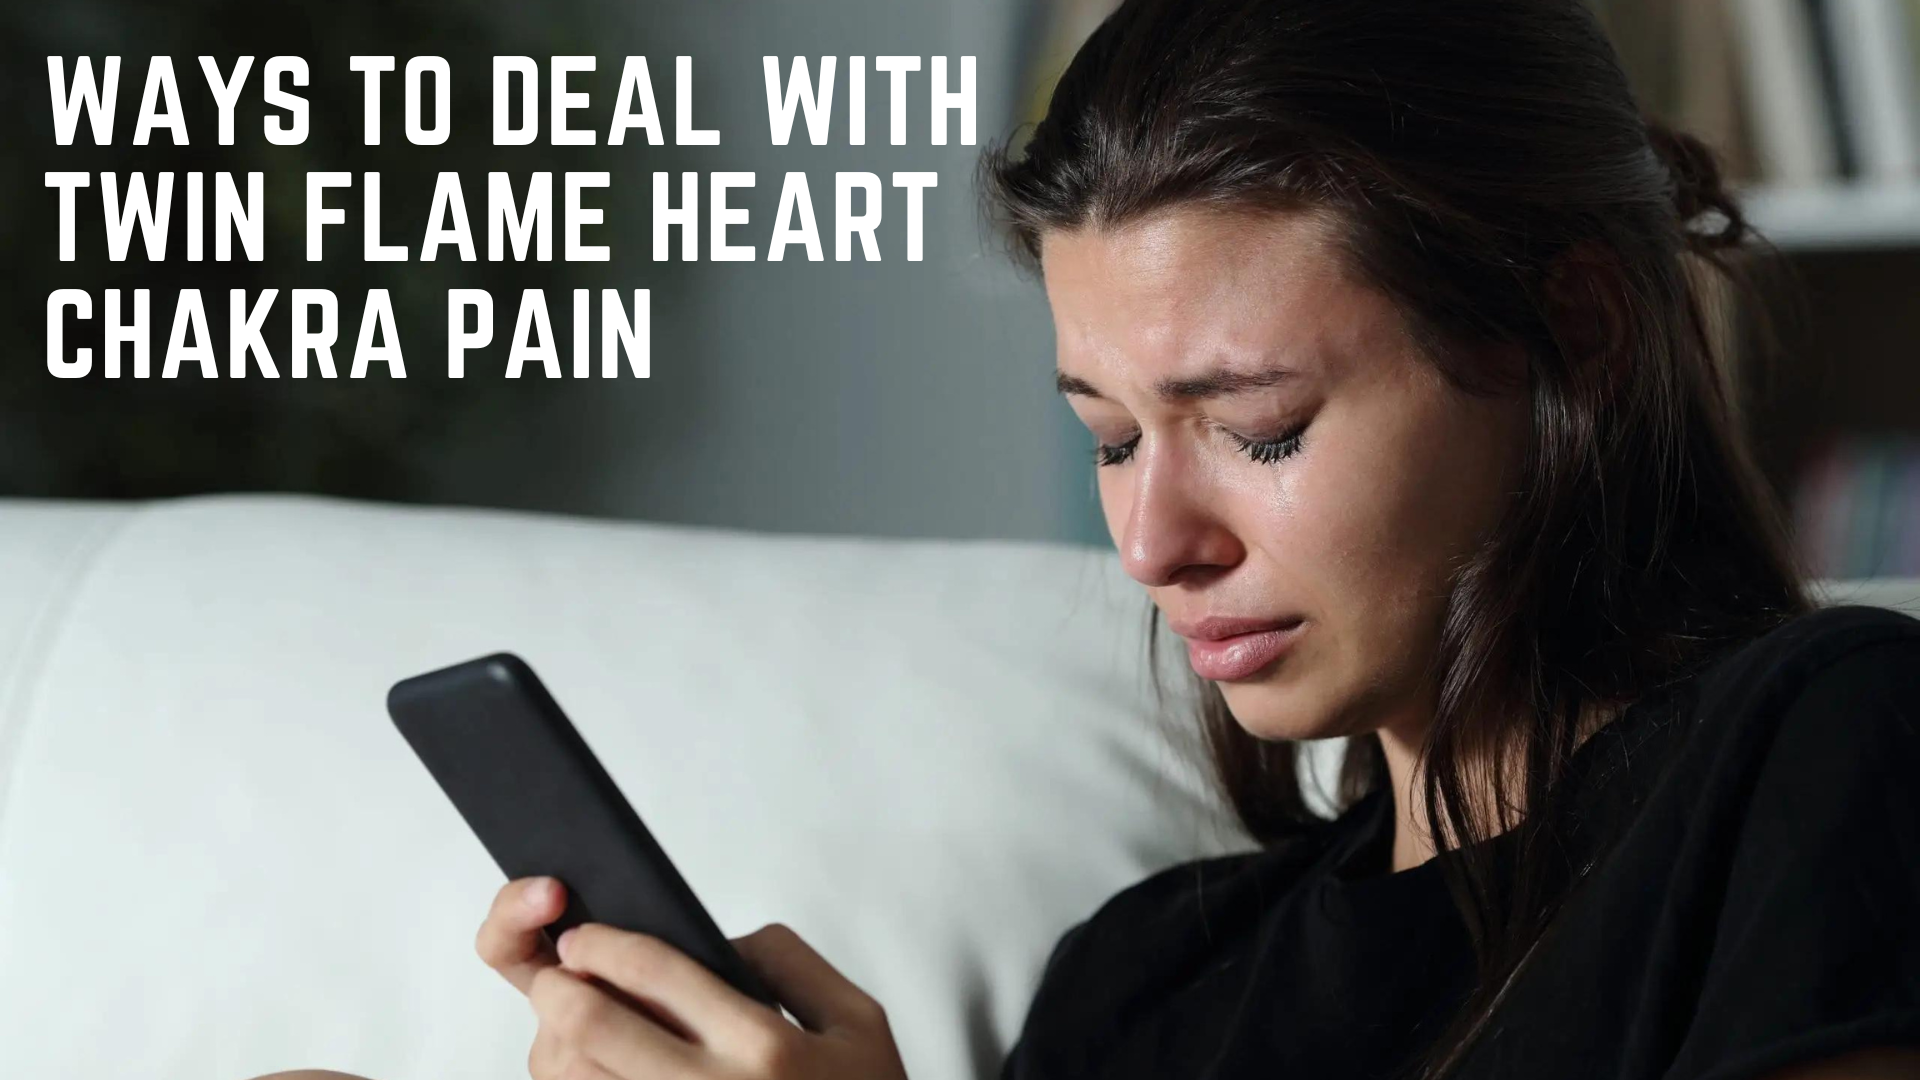 A crying woman sitting on the couch while holding a phone